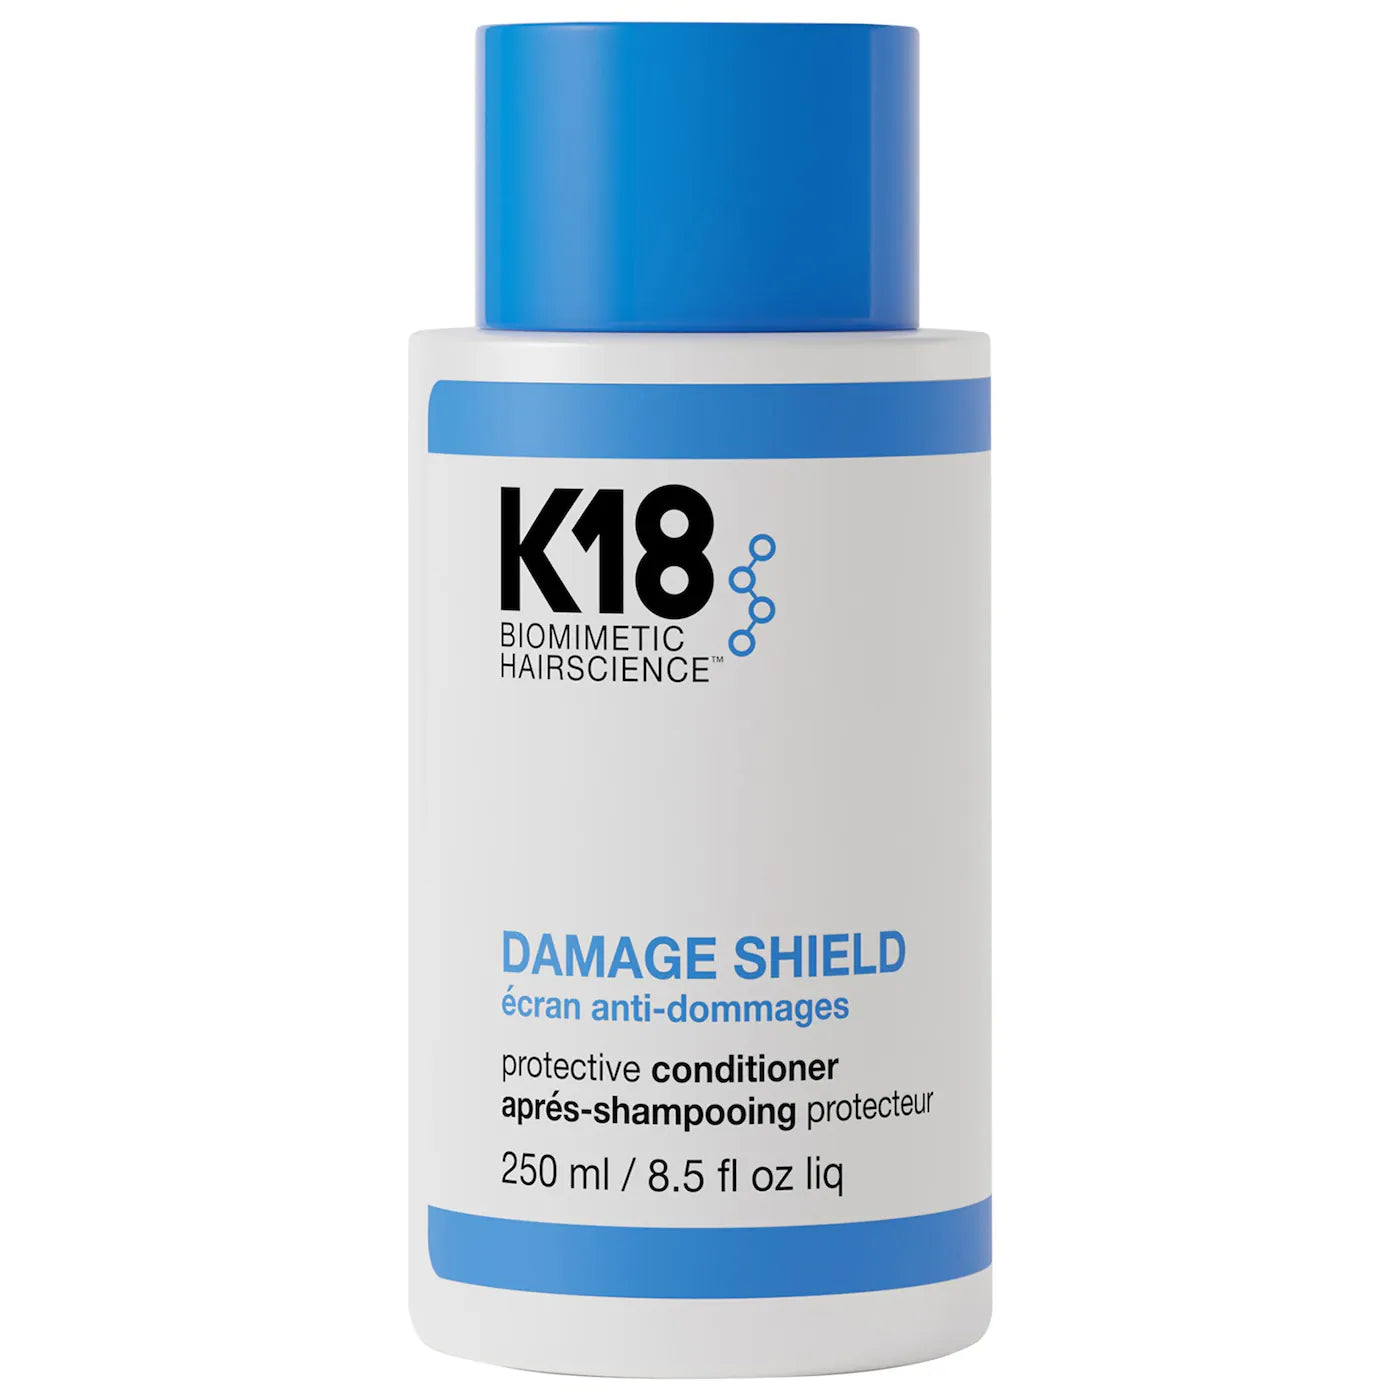 K18 Biomimetic Hairscience - DAMAGE SHIELD Protective Conditioner | 250 mL